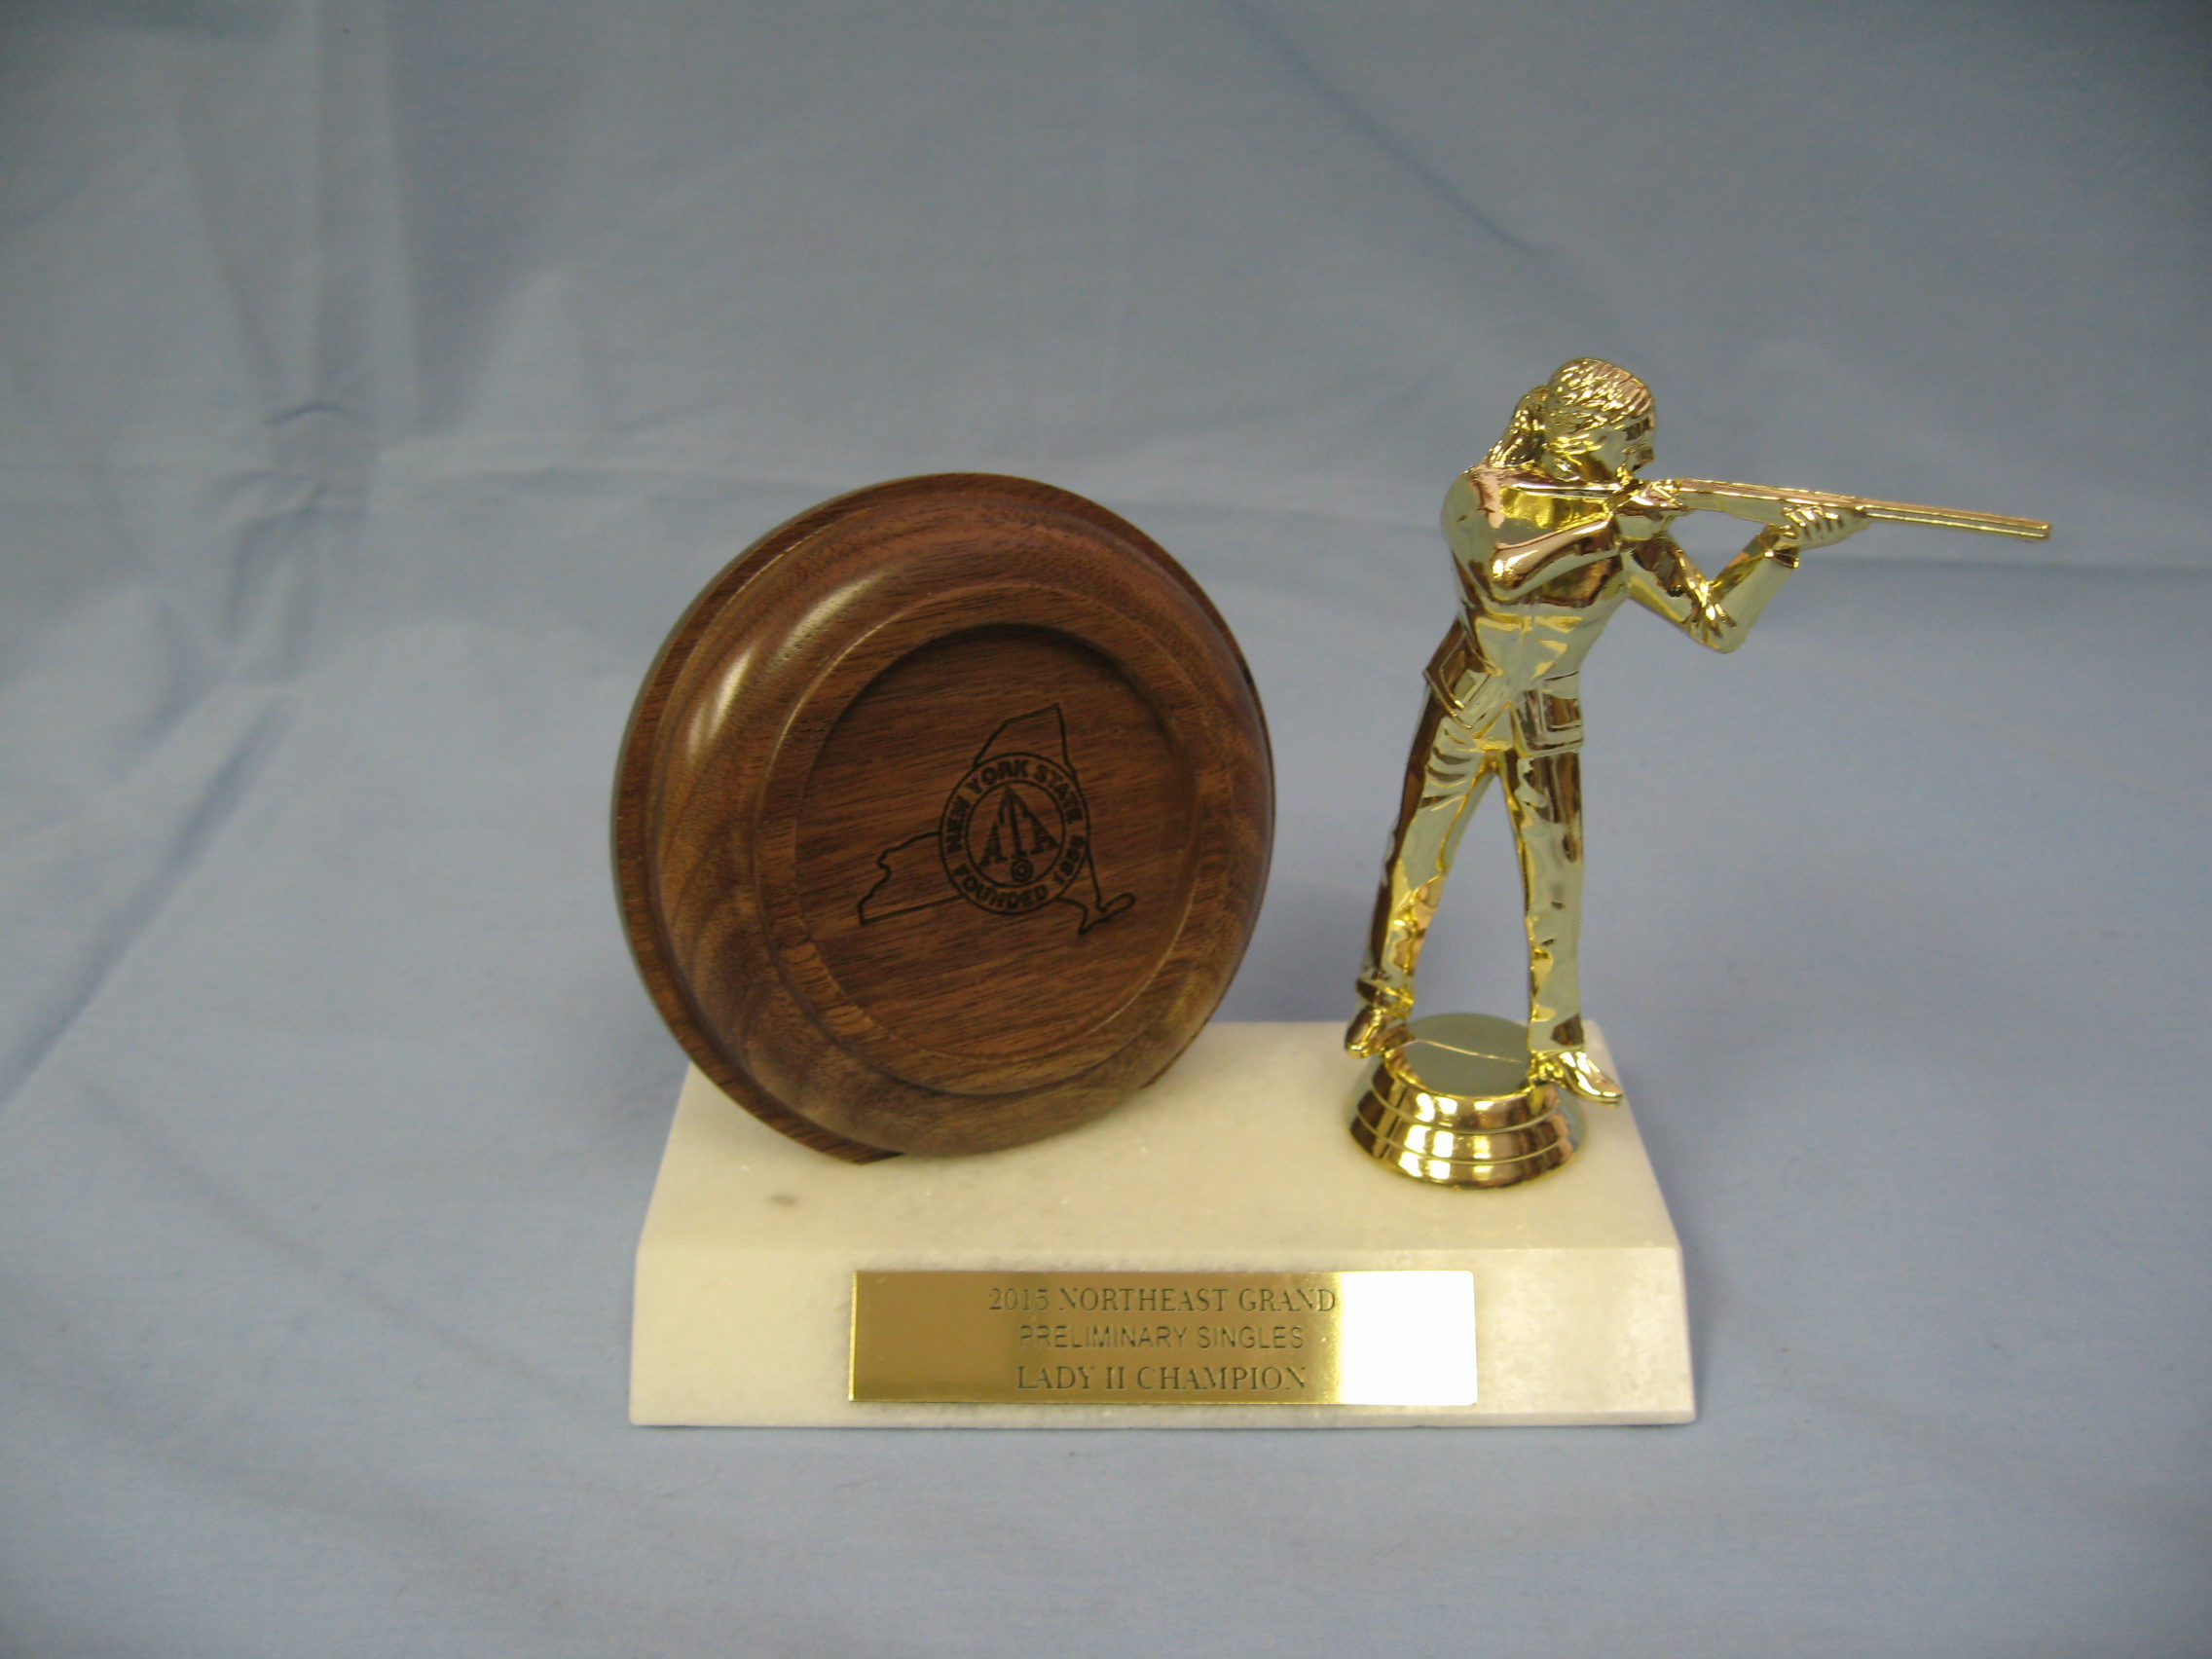 Crown Awards 11 Inch Trap Shooting Trophies Male Trap Shooter Trophy with Custom Engraving Prime